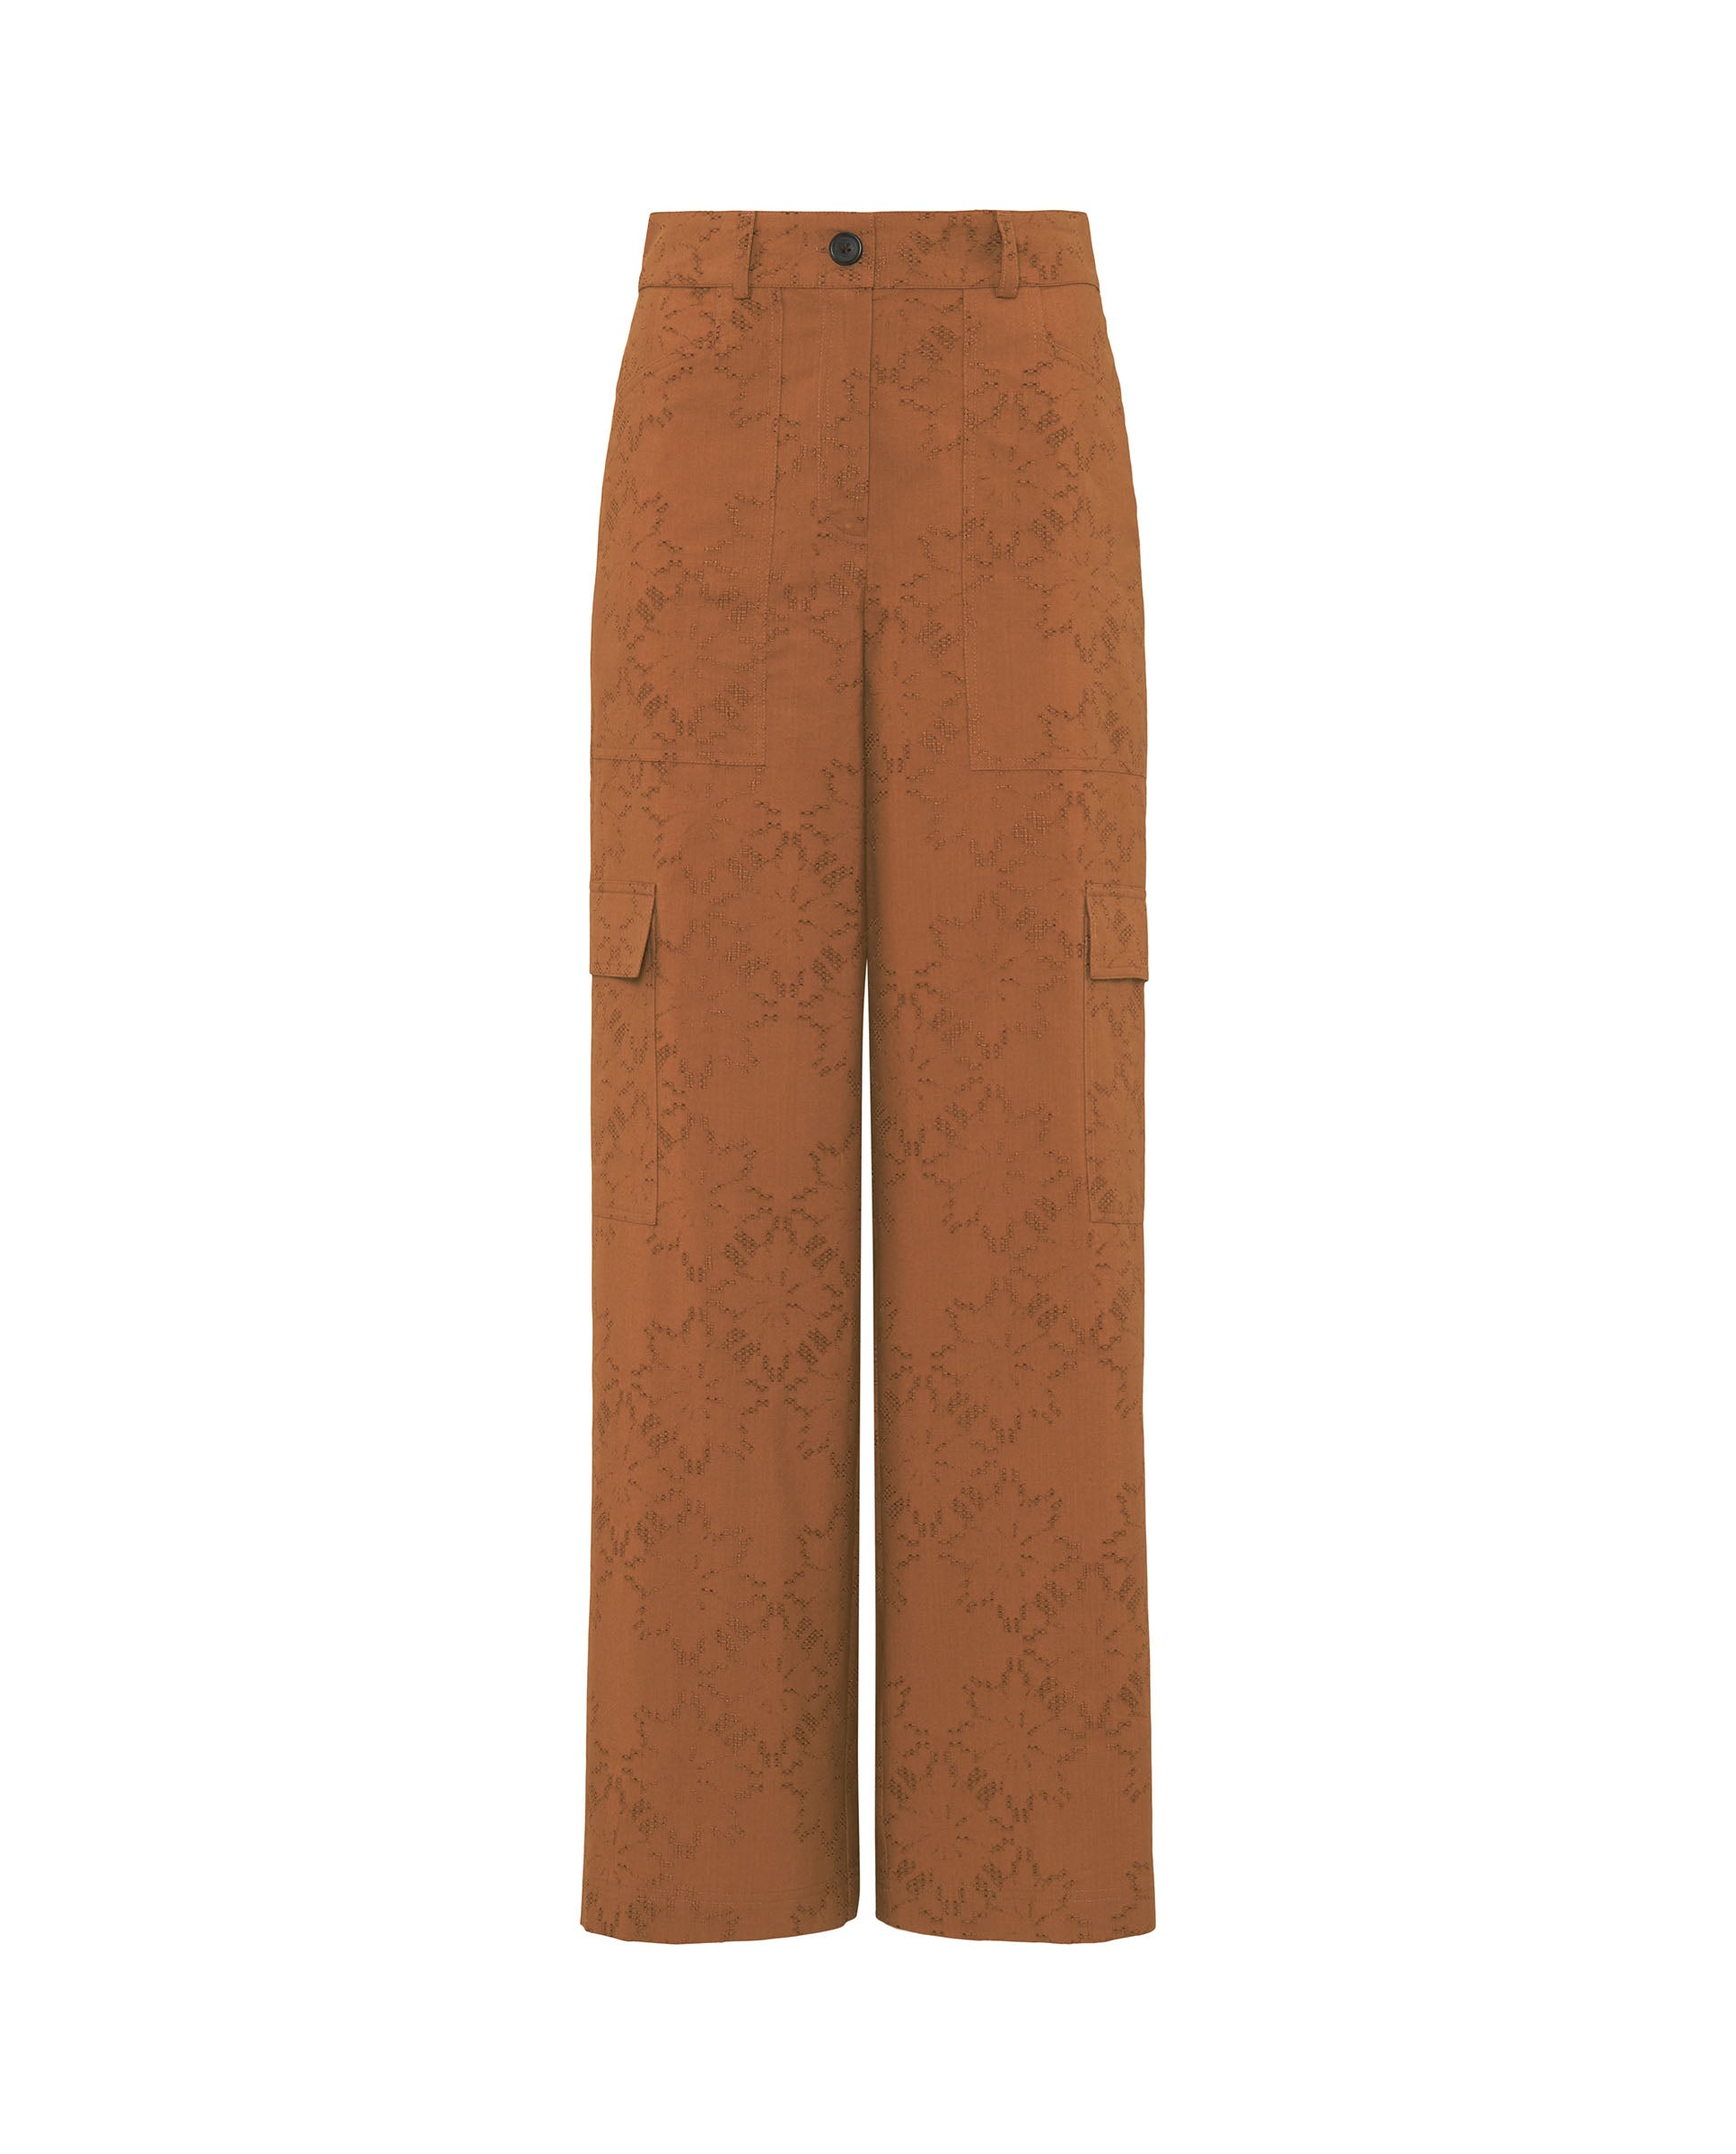 Ginger brown cotton blend cargo trousers by MIRTO